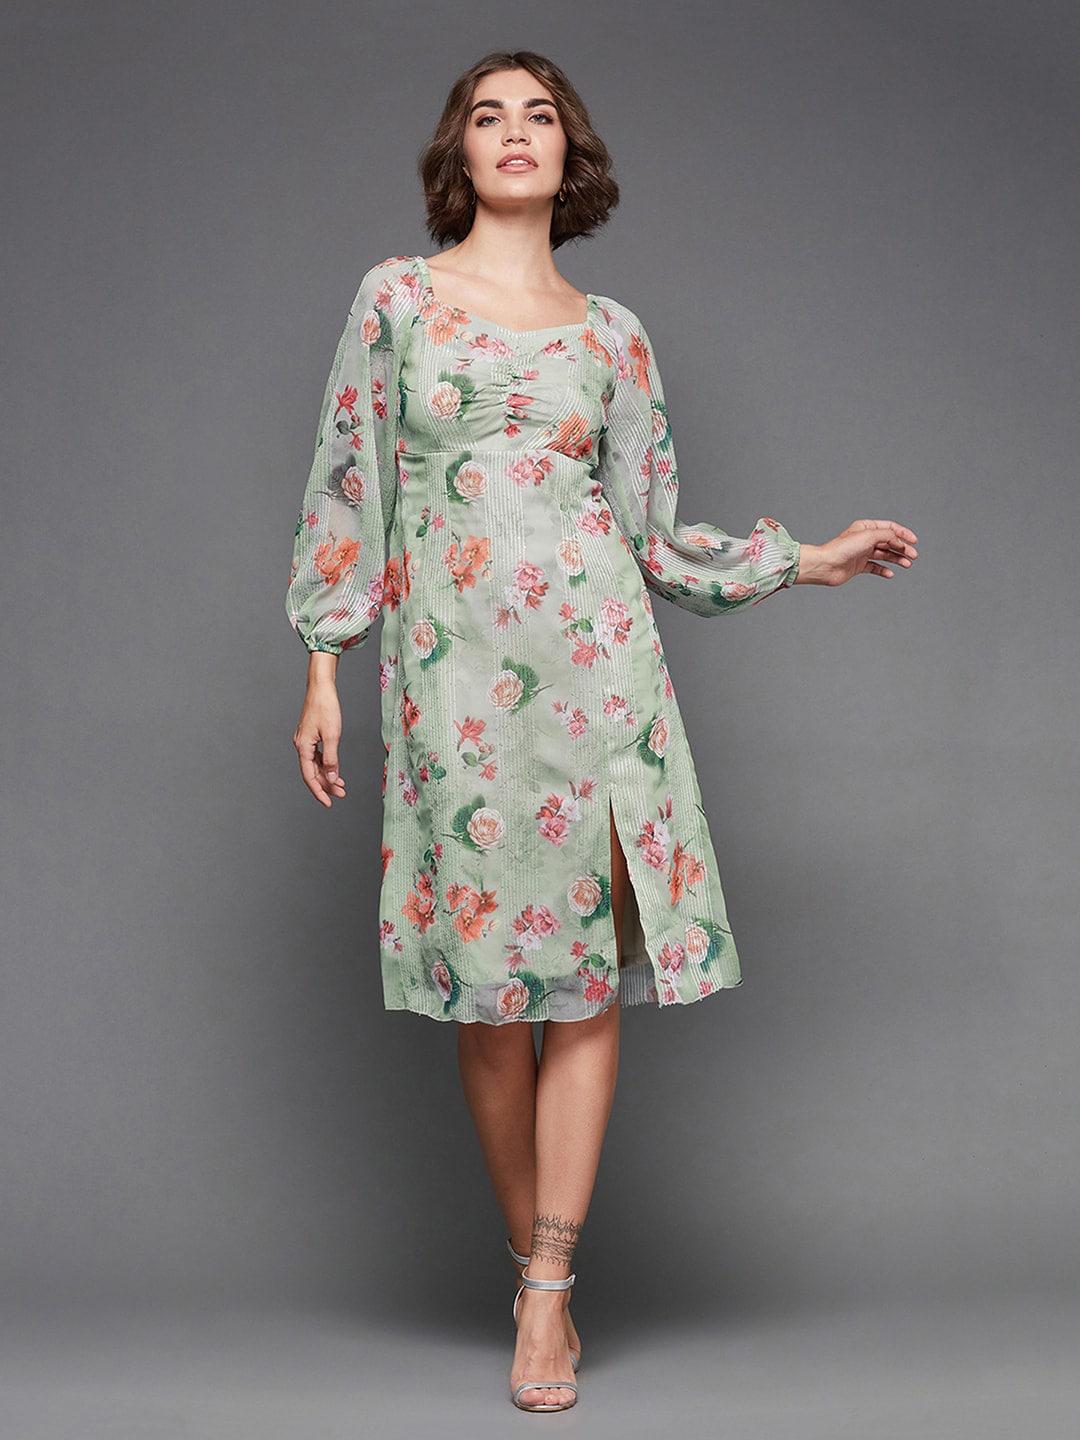 miss-chase-green-floral-print-flared-sleeve-georgette-a-line-dress